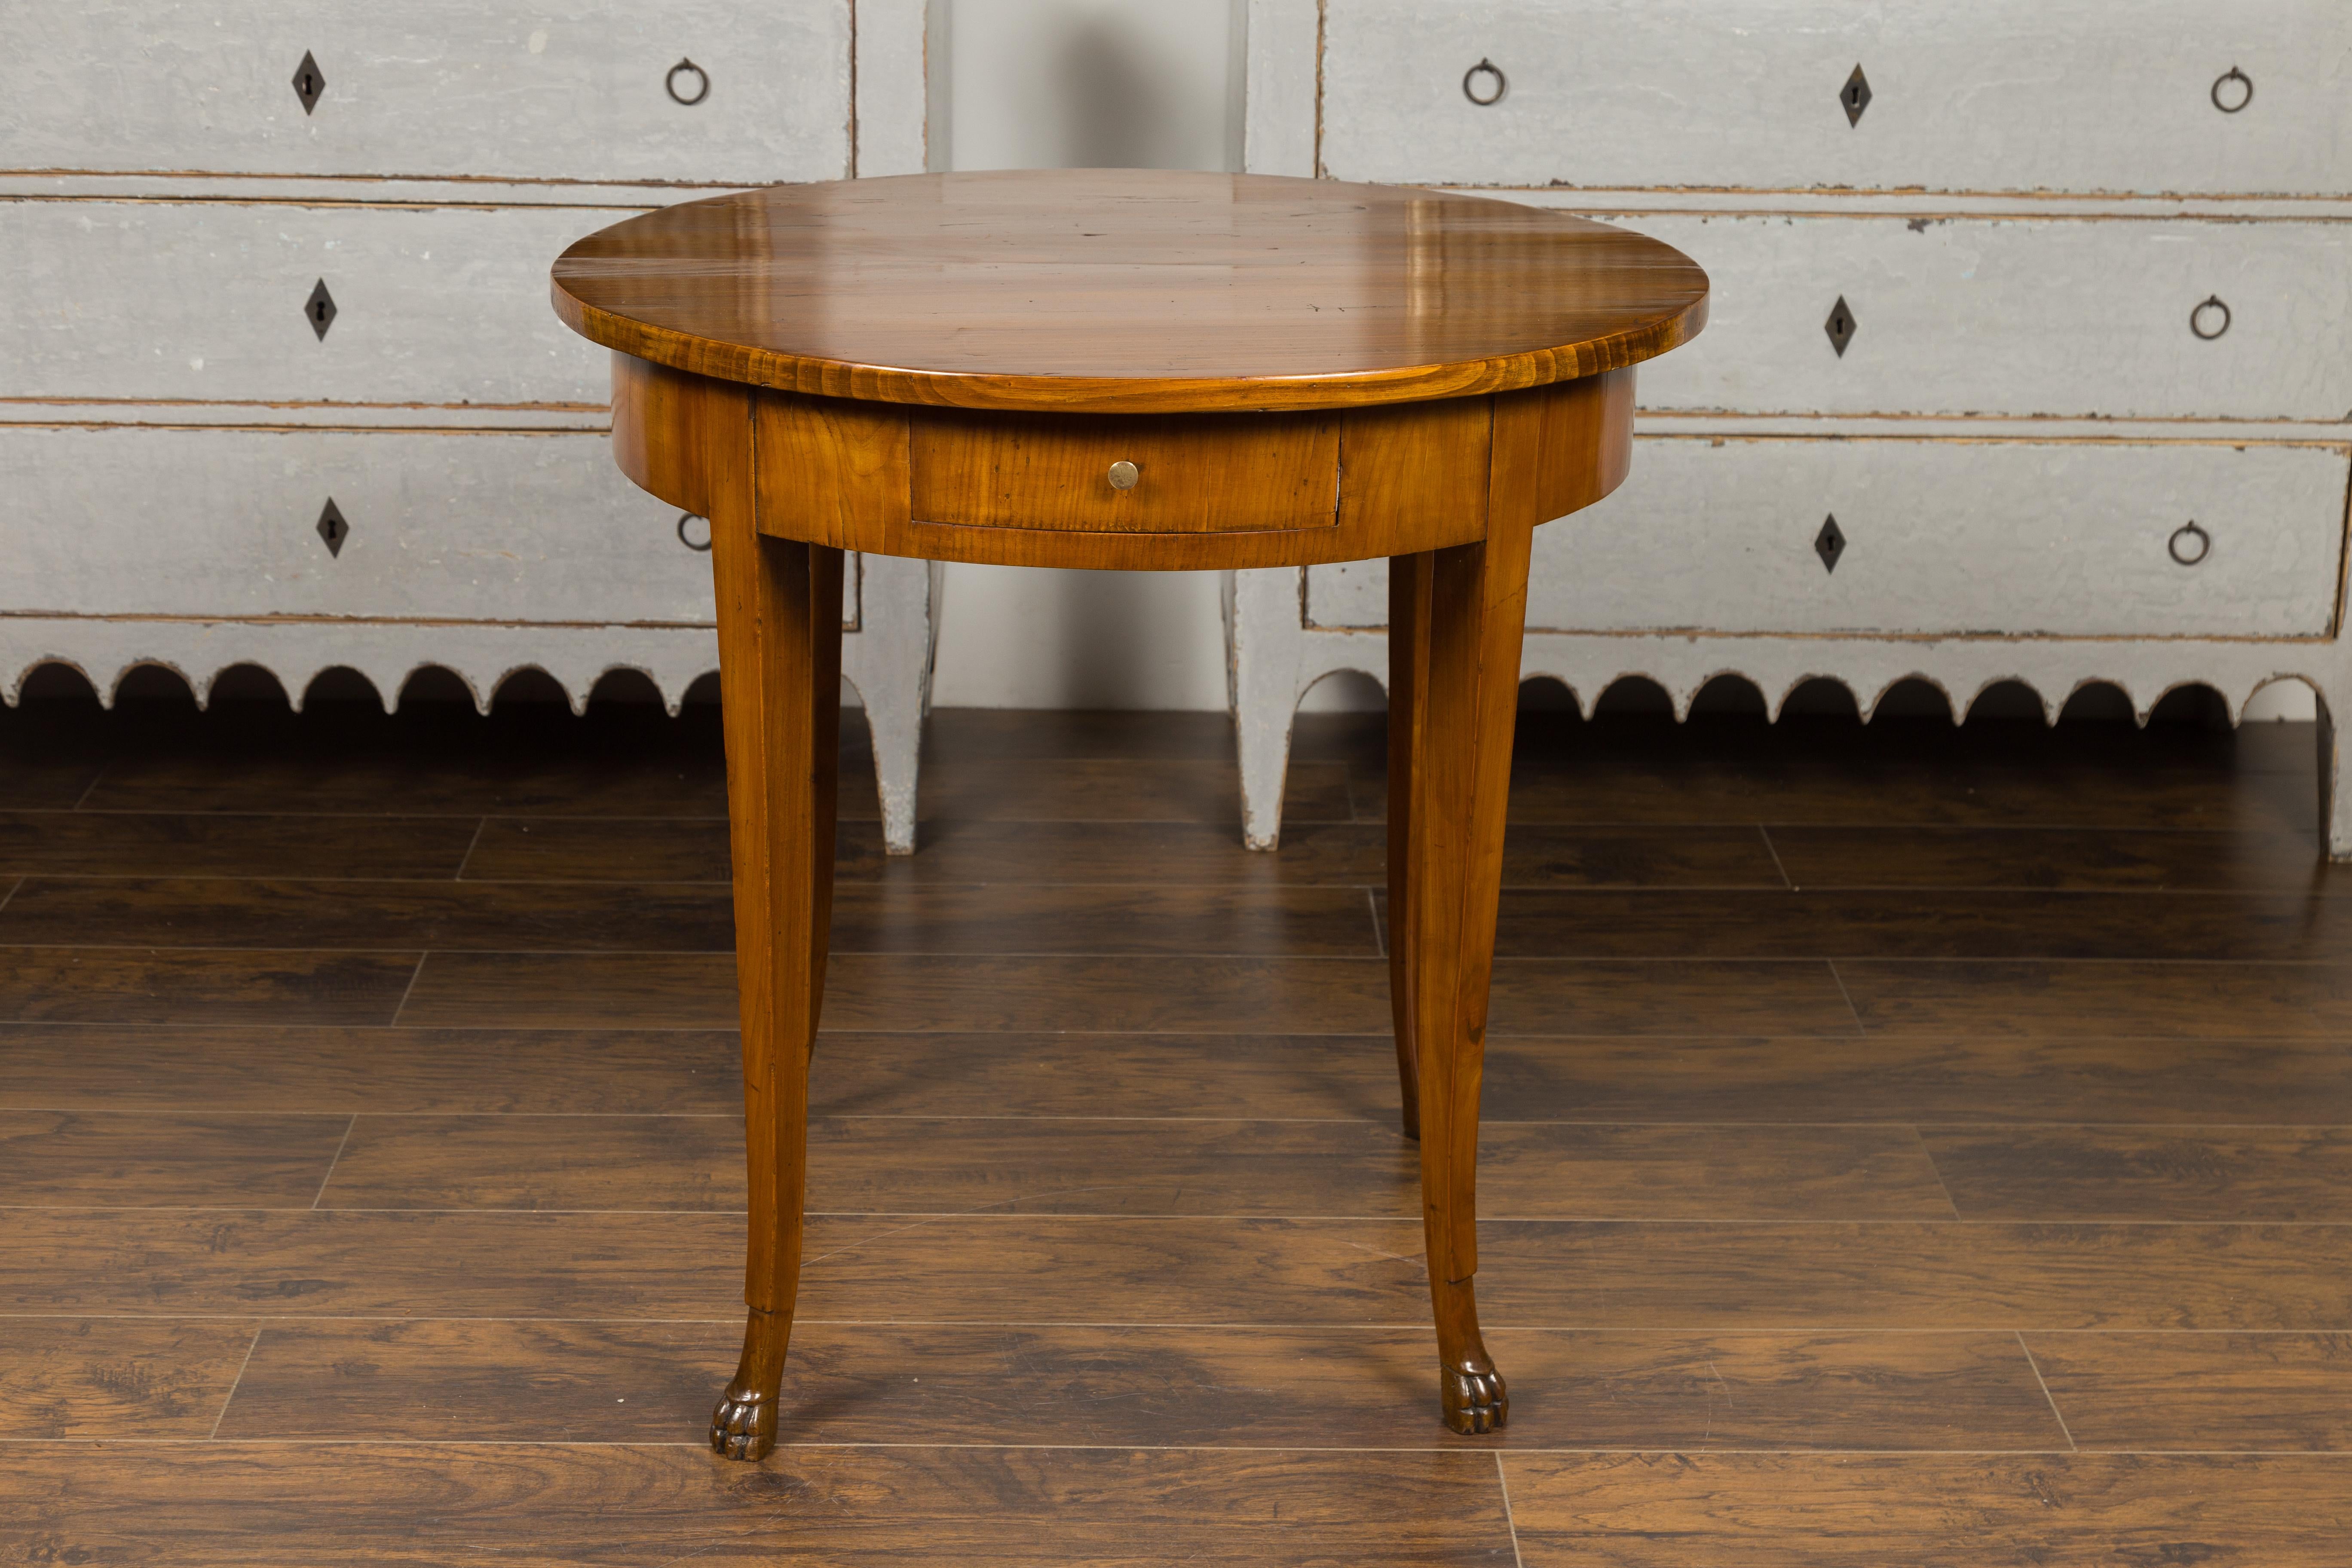 A French Louis-Philippe period walnut table from the mid-19th century, with single drawer and paw feet. Born in France during the reign of King Louis-Philippe, this walnut table features a circular top sitting above a single drawer fitted with a